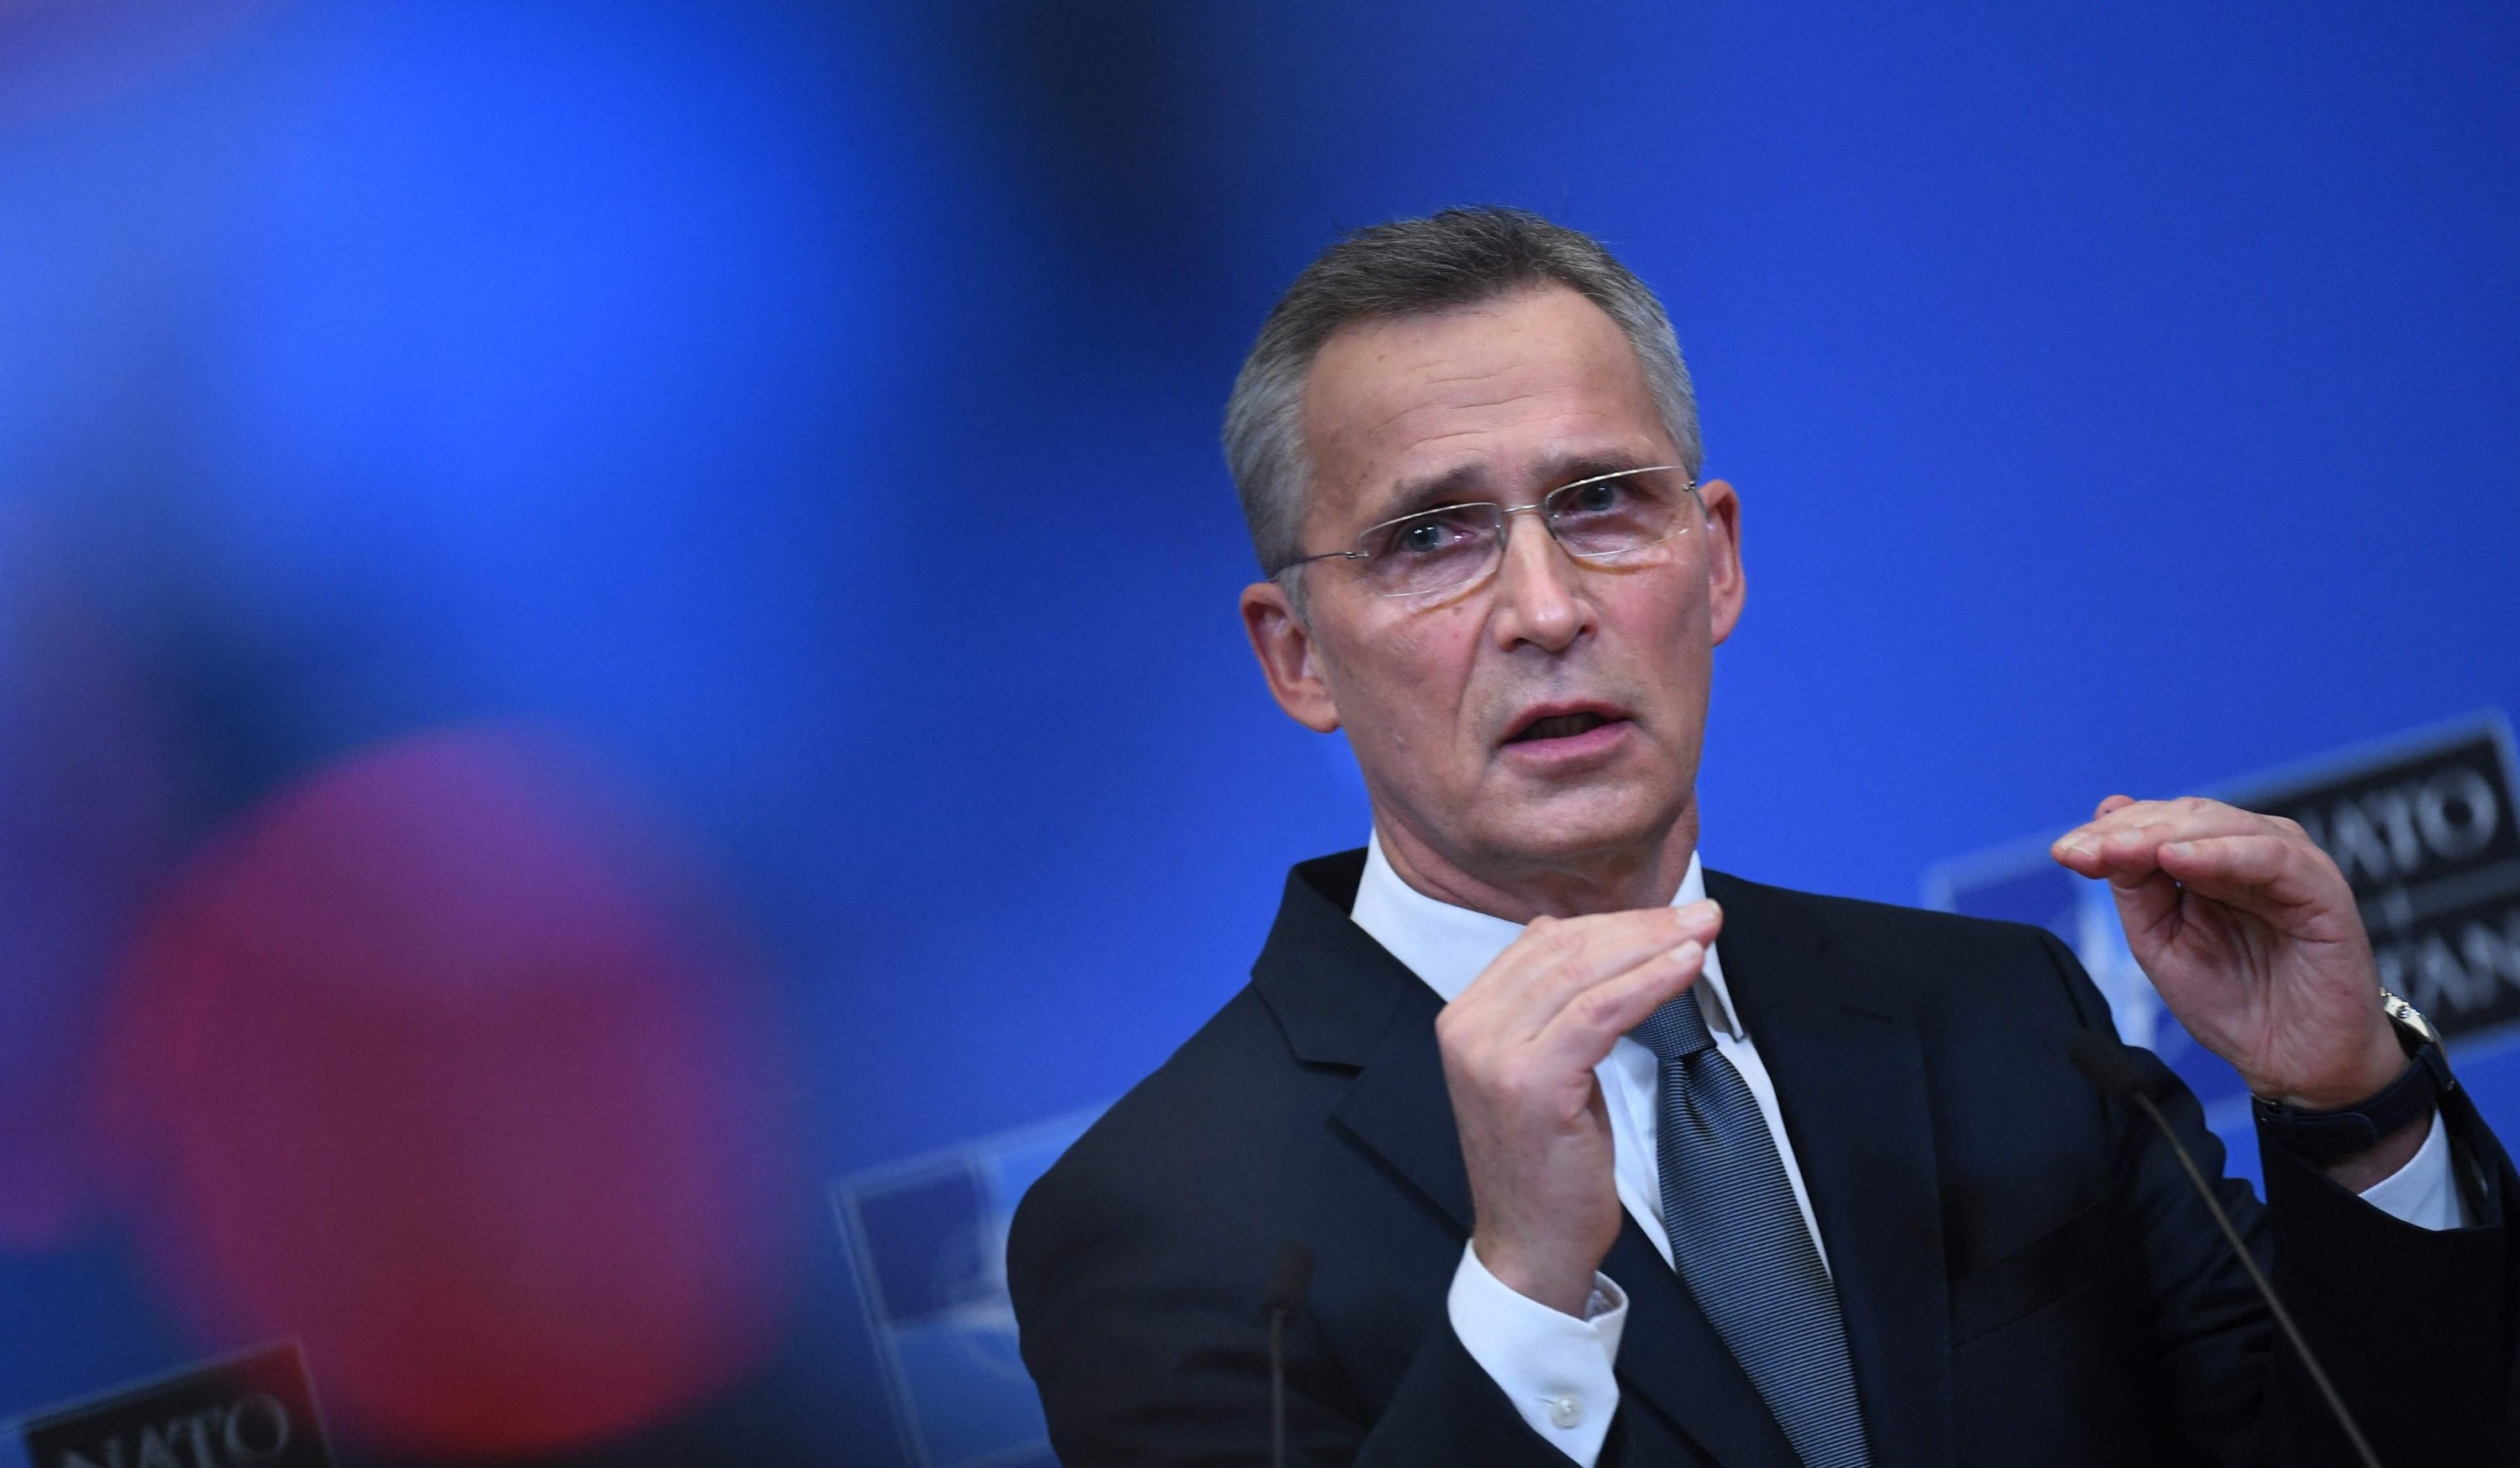 Ukrainian conflict to be resolved at negotiations table: Stoltenberg